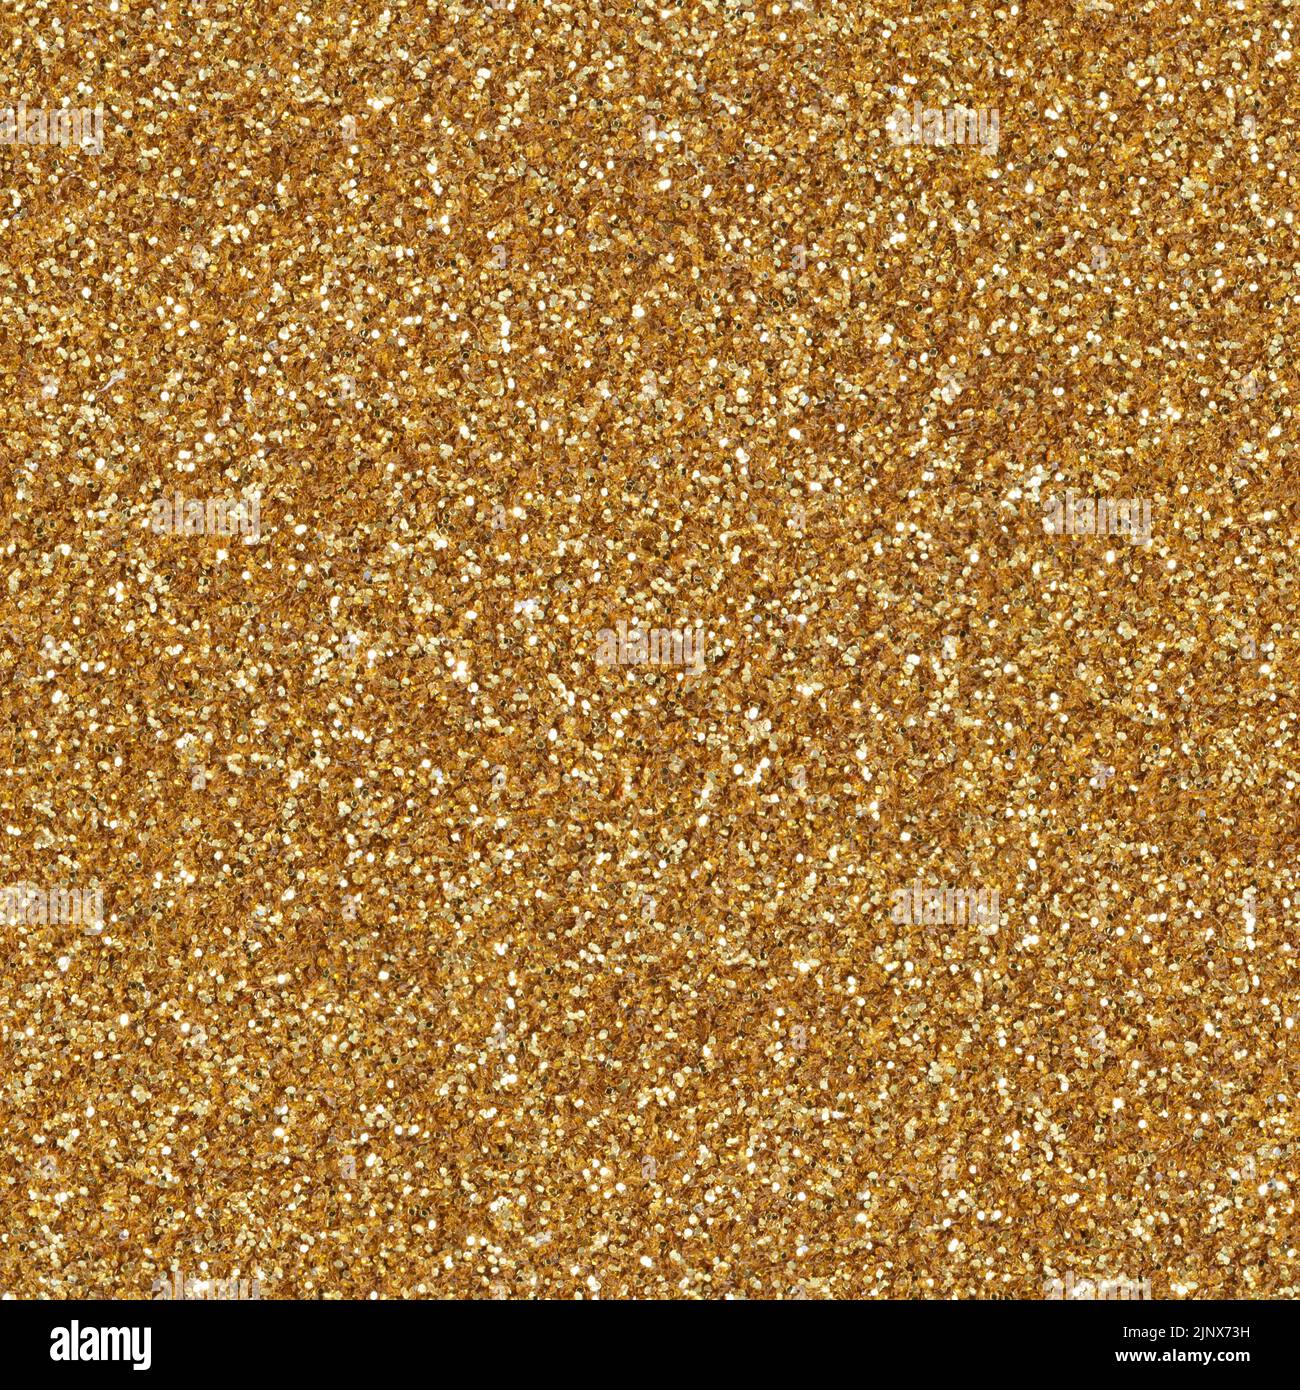 Golden holographic glitter texture christmas background. Seamless square texture. Stock Photo